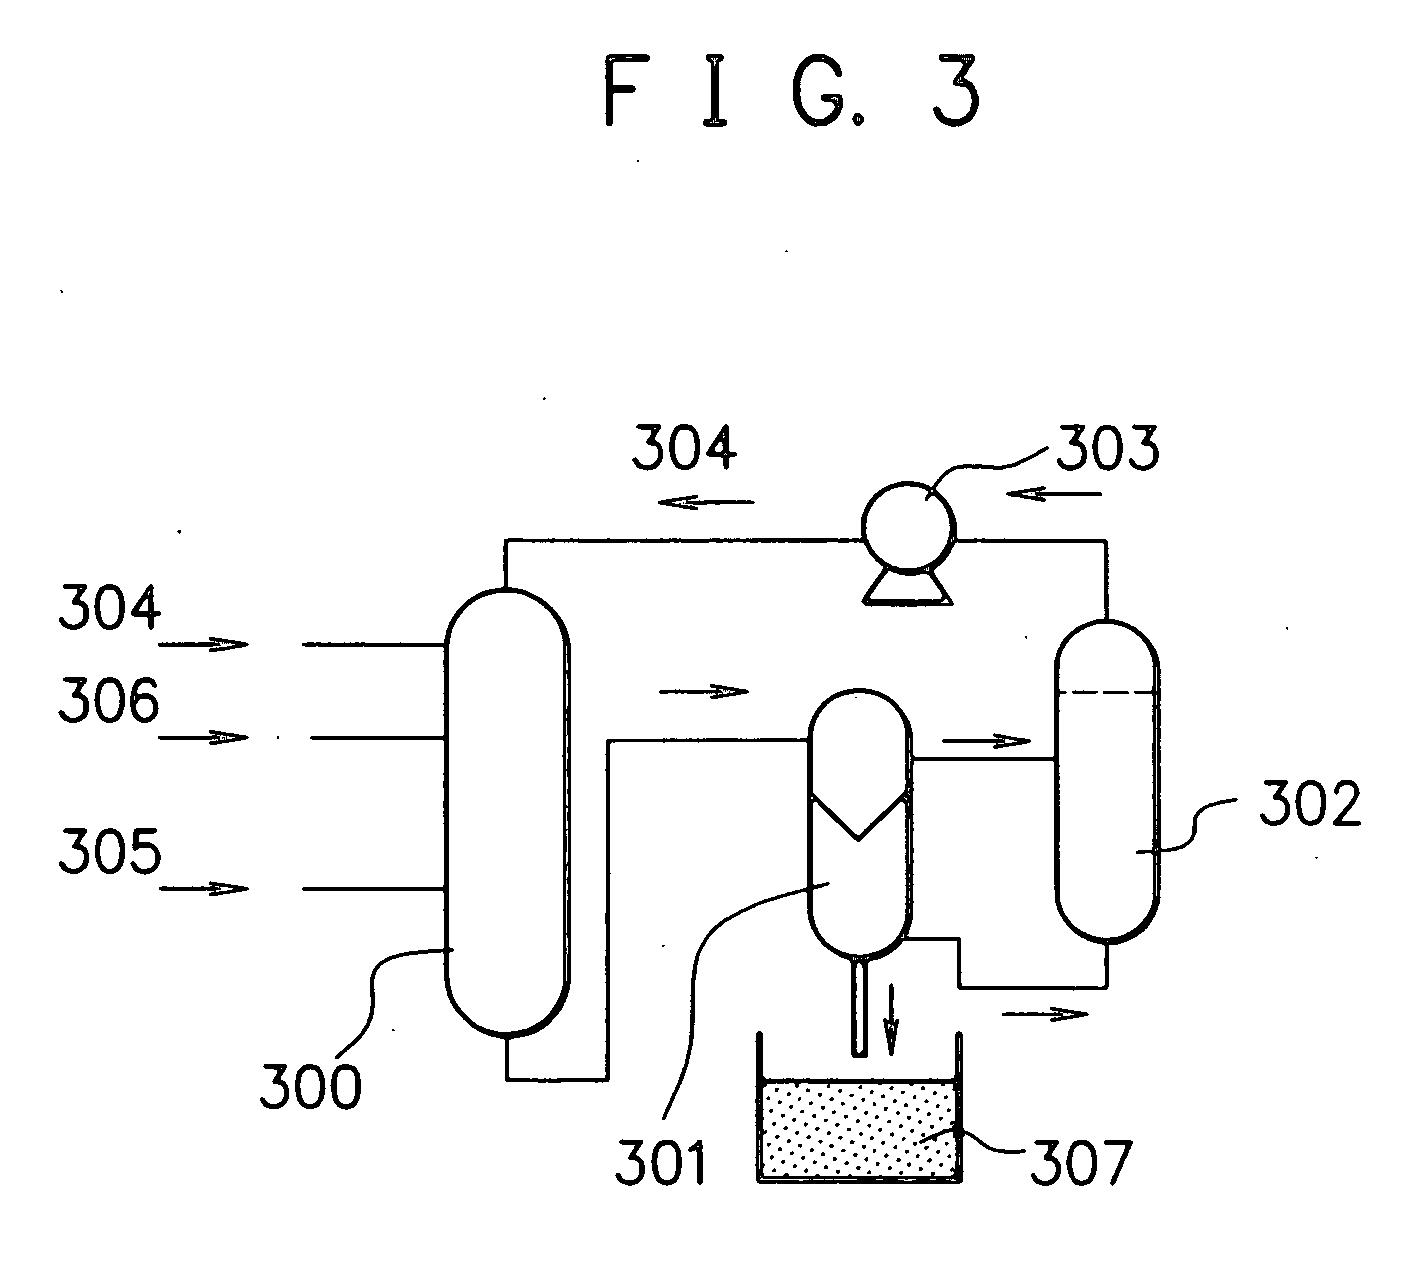 Method for producing nano-carbon materials